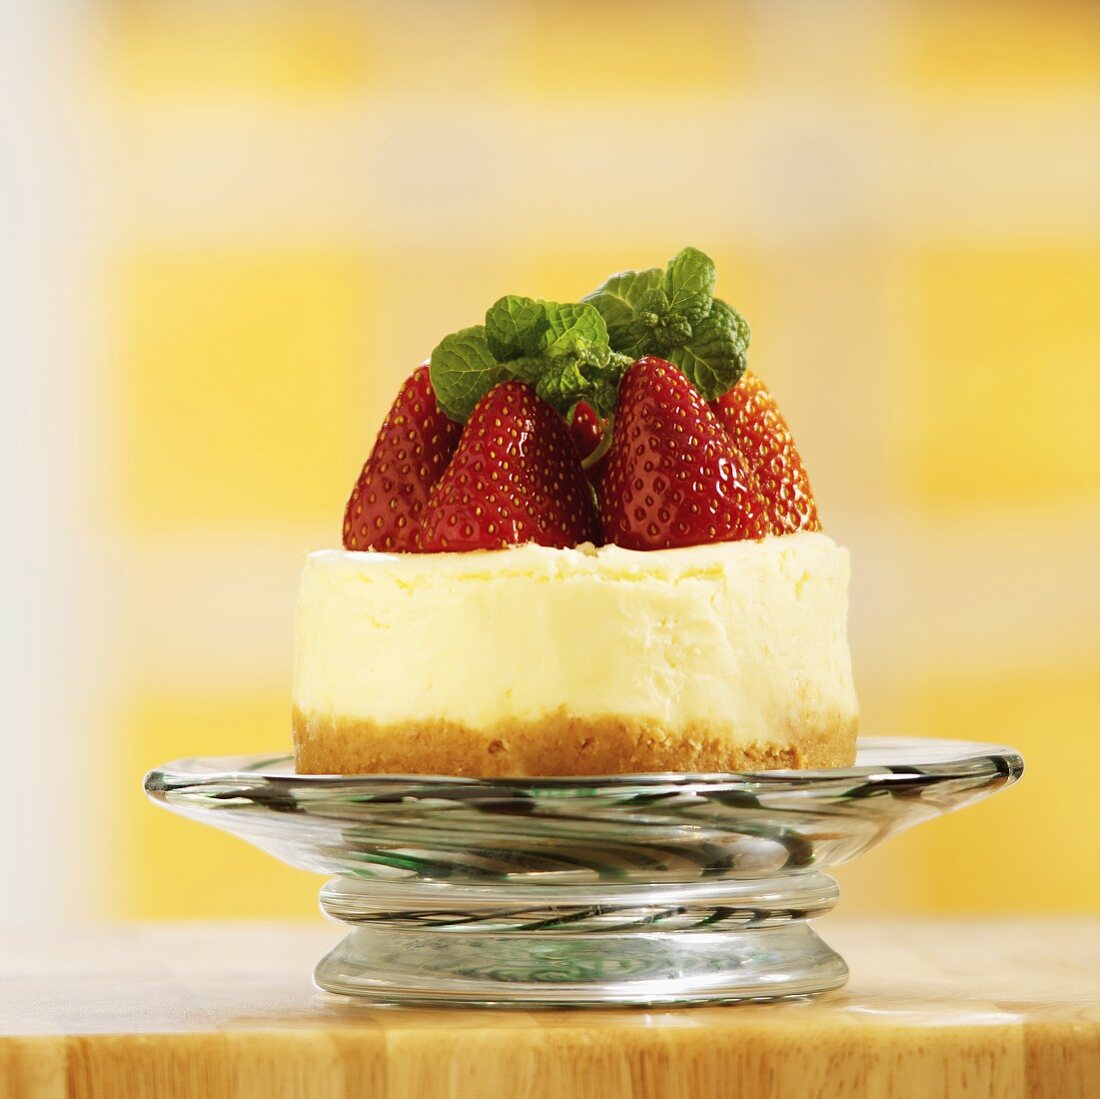 A Mini Cheesecake with Strawberries and Mint